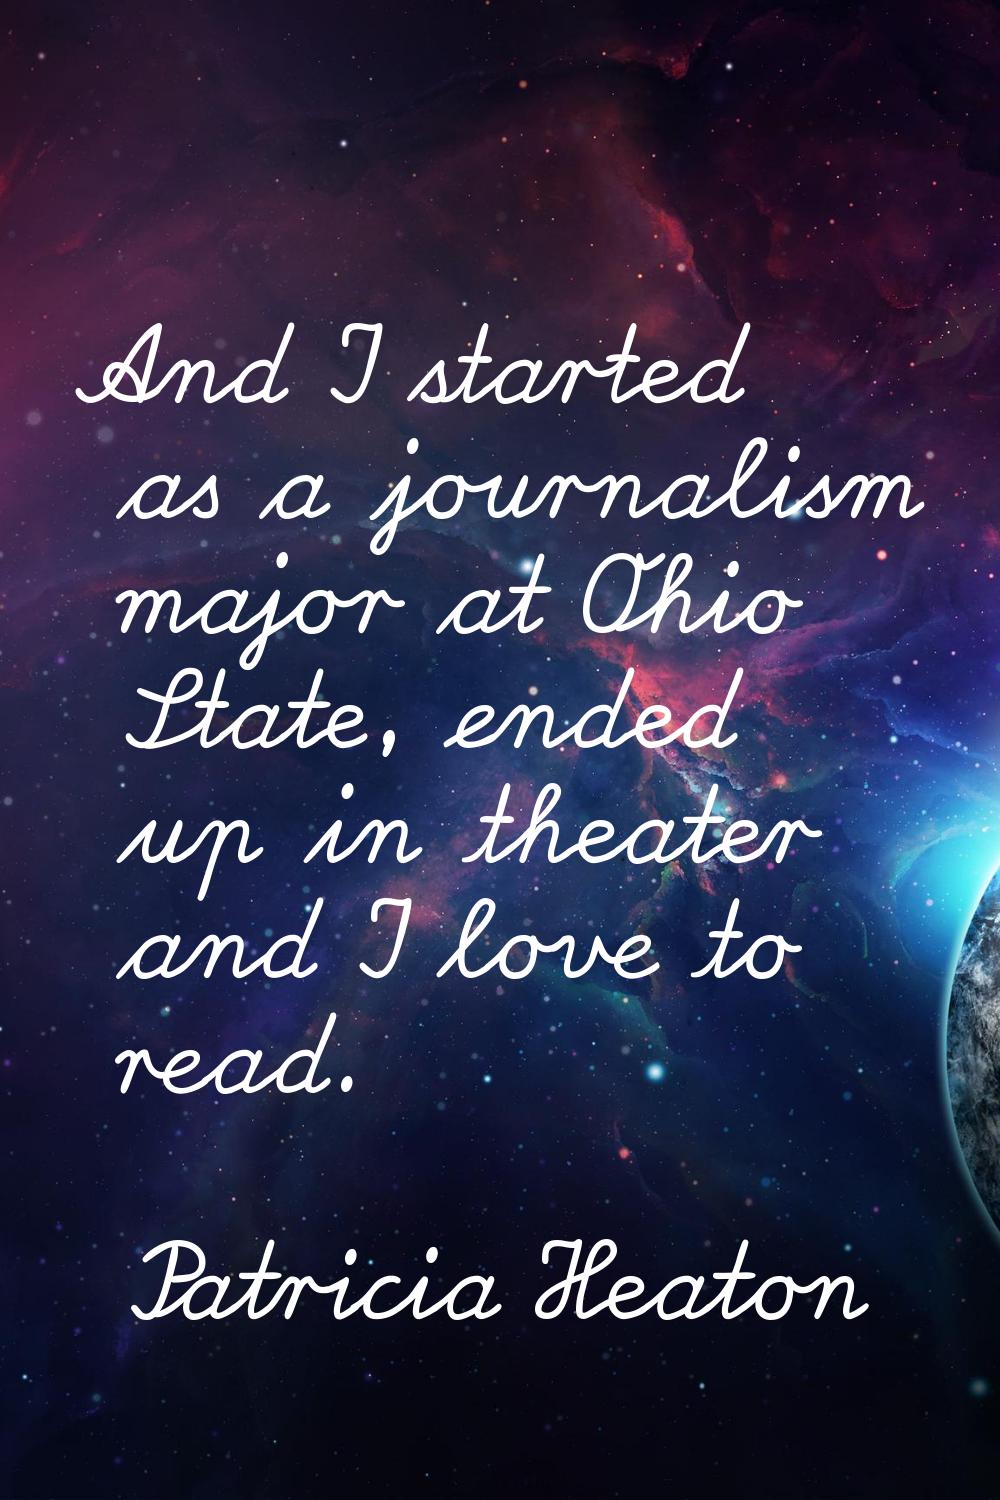 And I started as a journalism major at Ohio State, ended up in theater and I love to read.